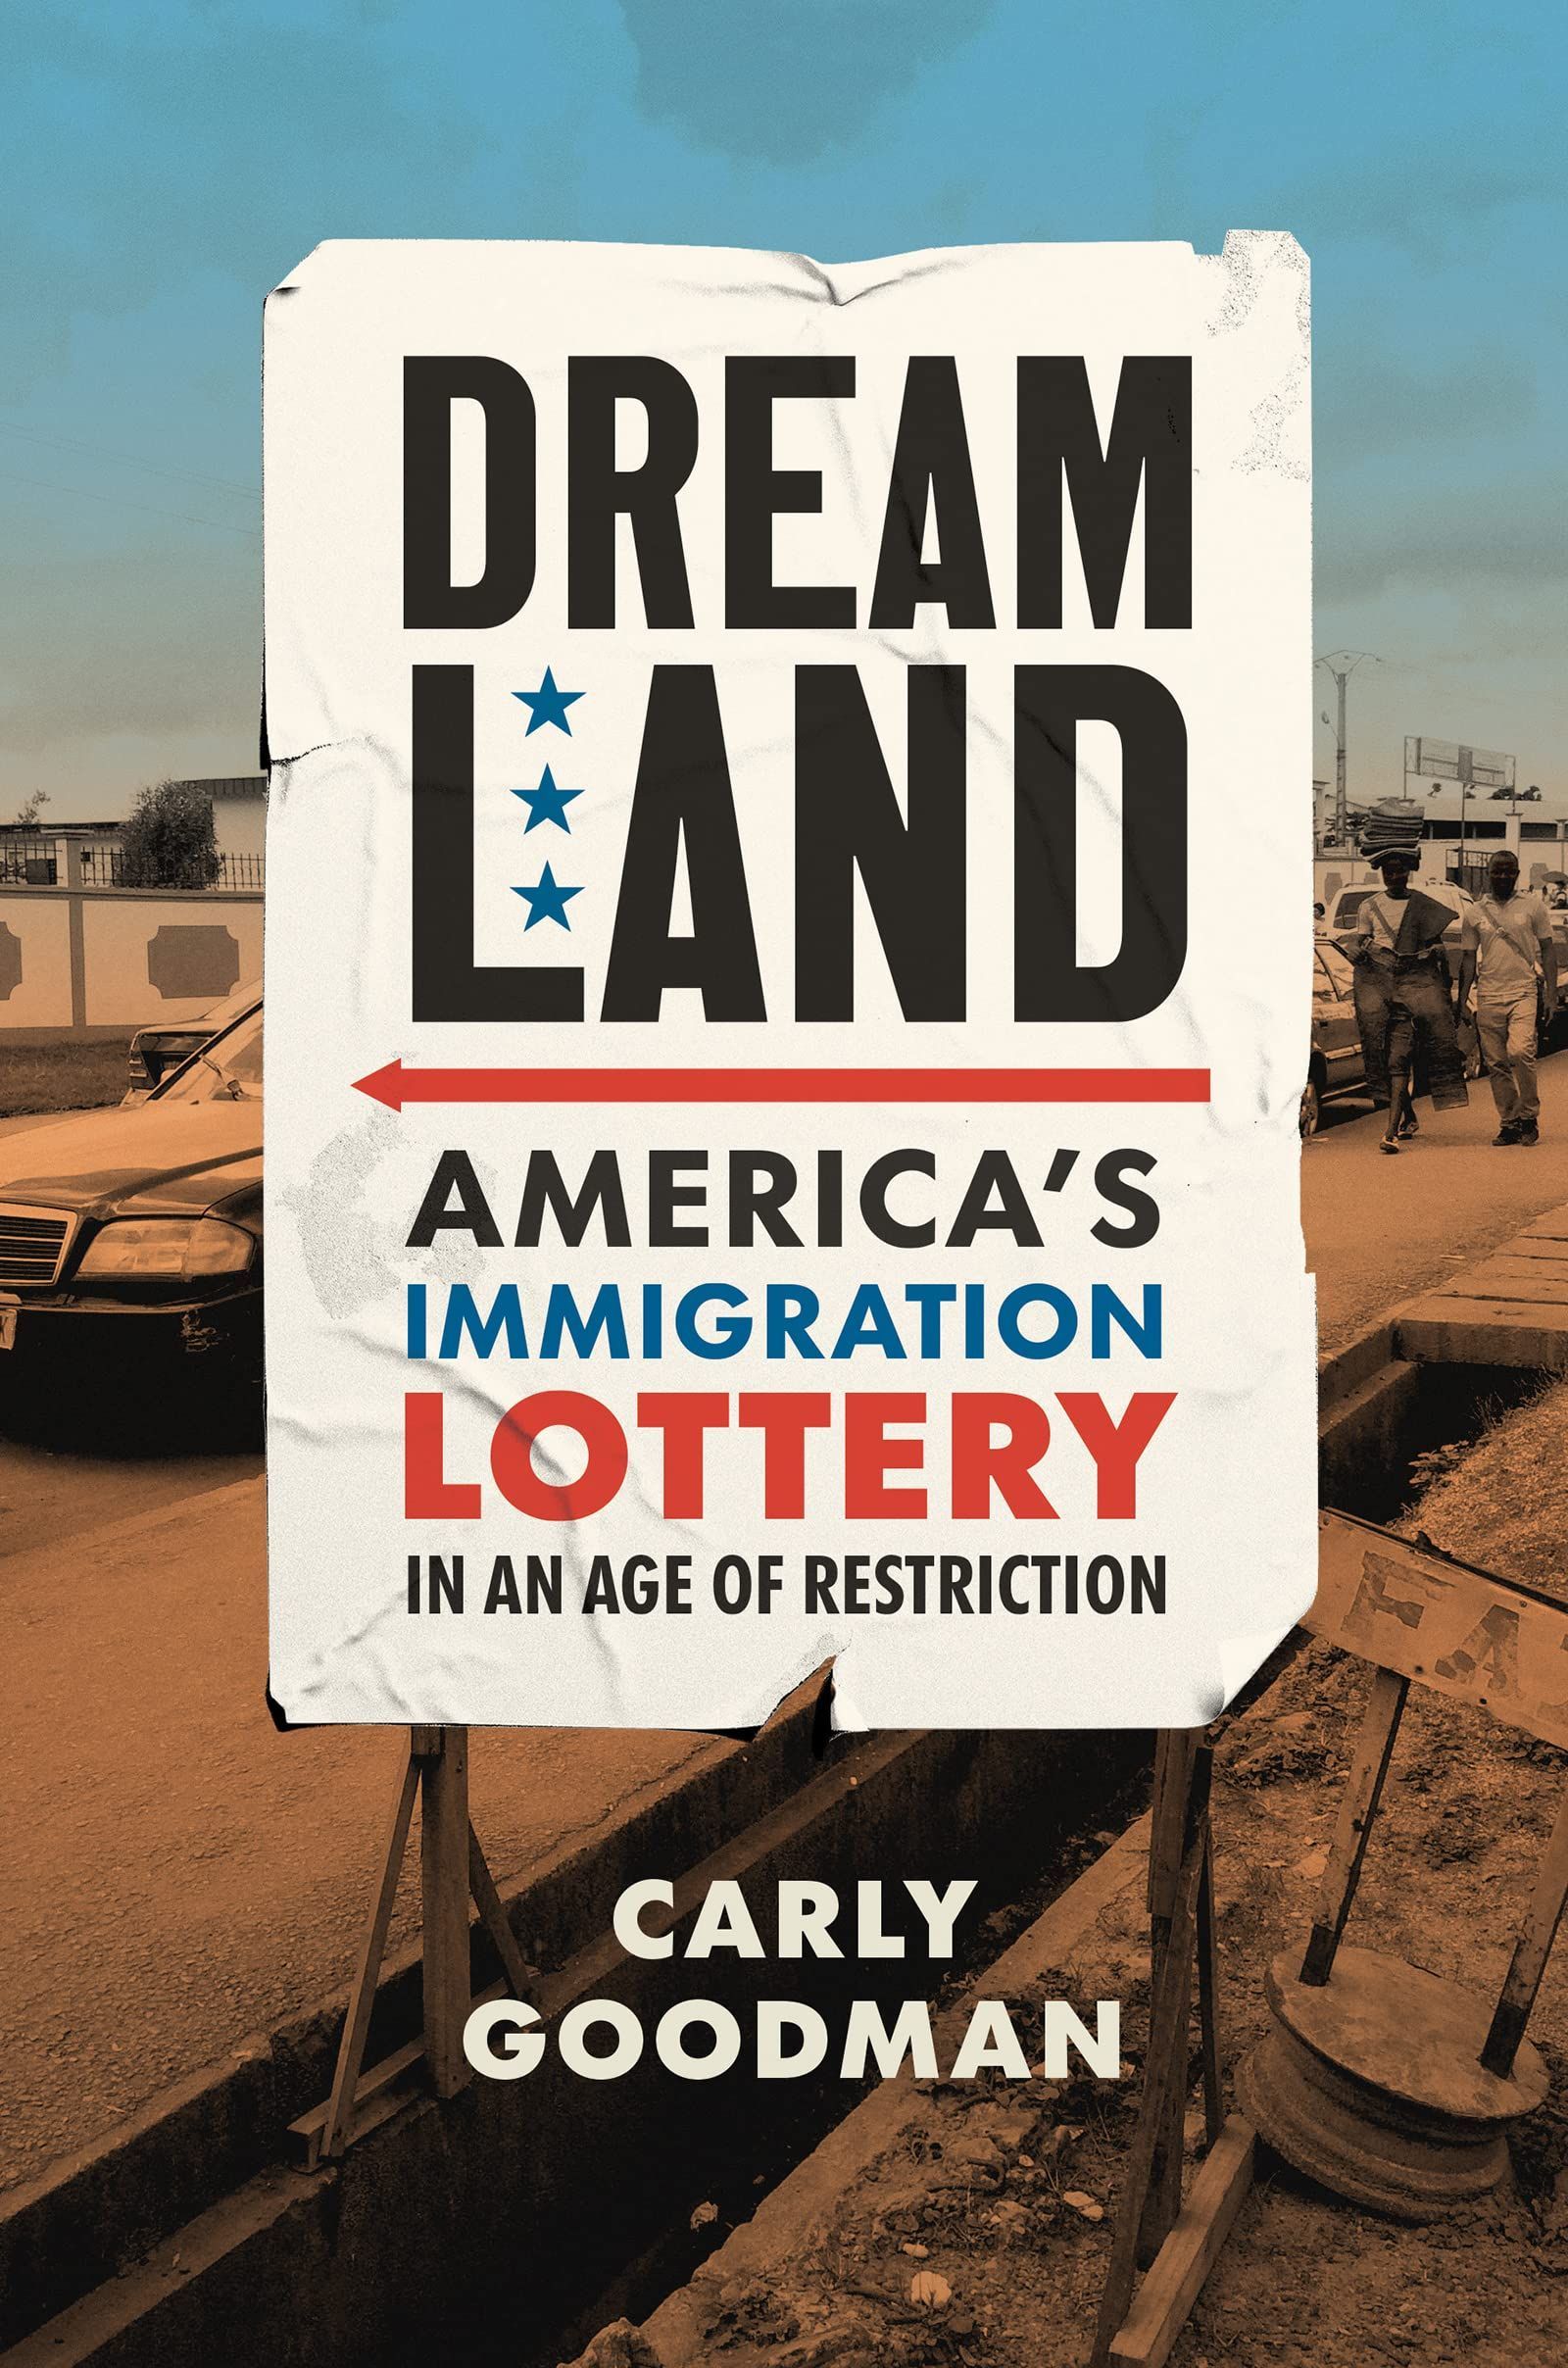 Impossible Systems: On Carly Goodman’s “Dreamland”